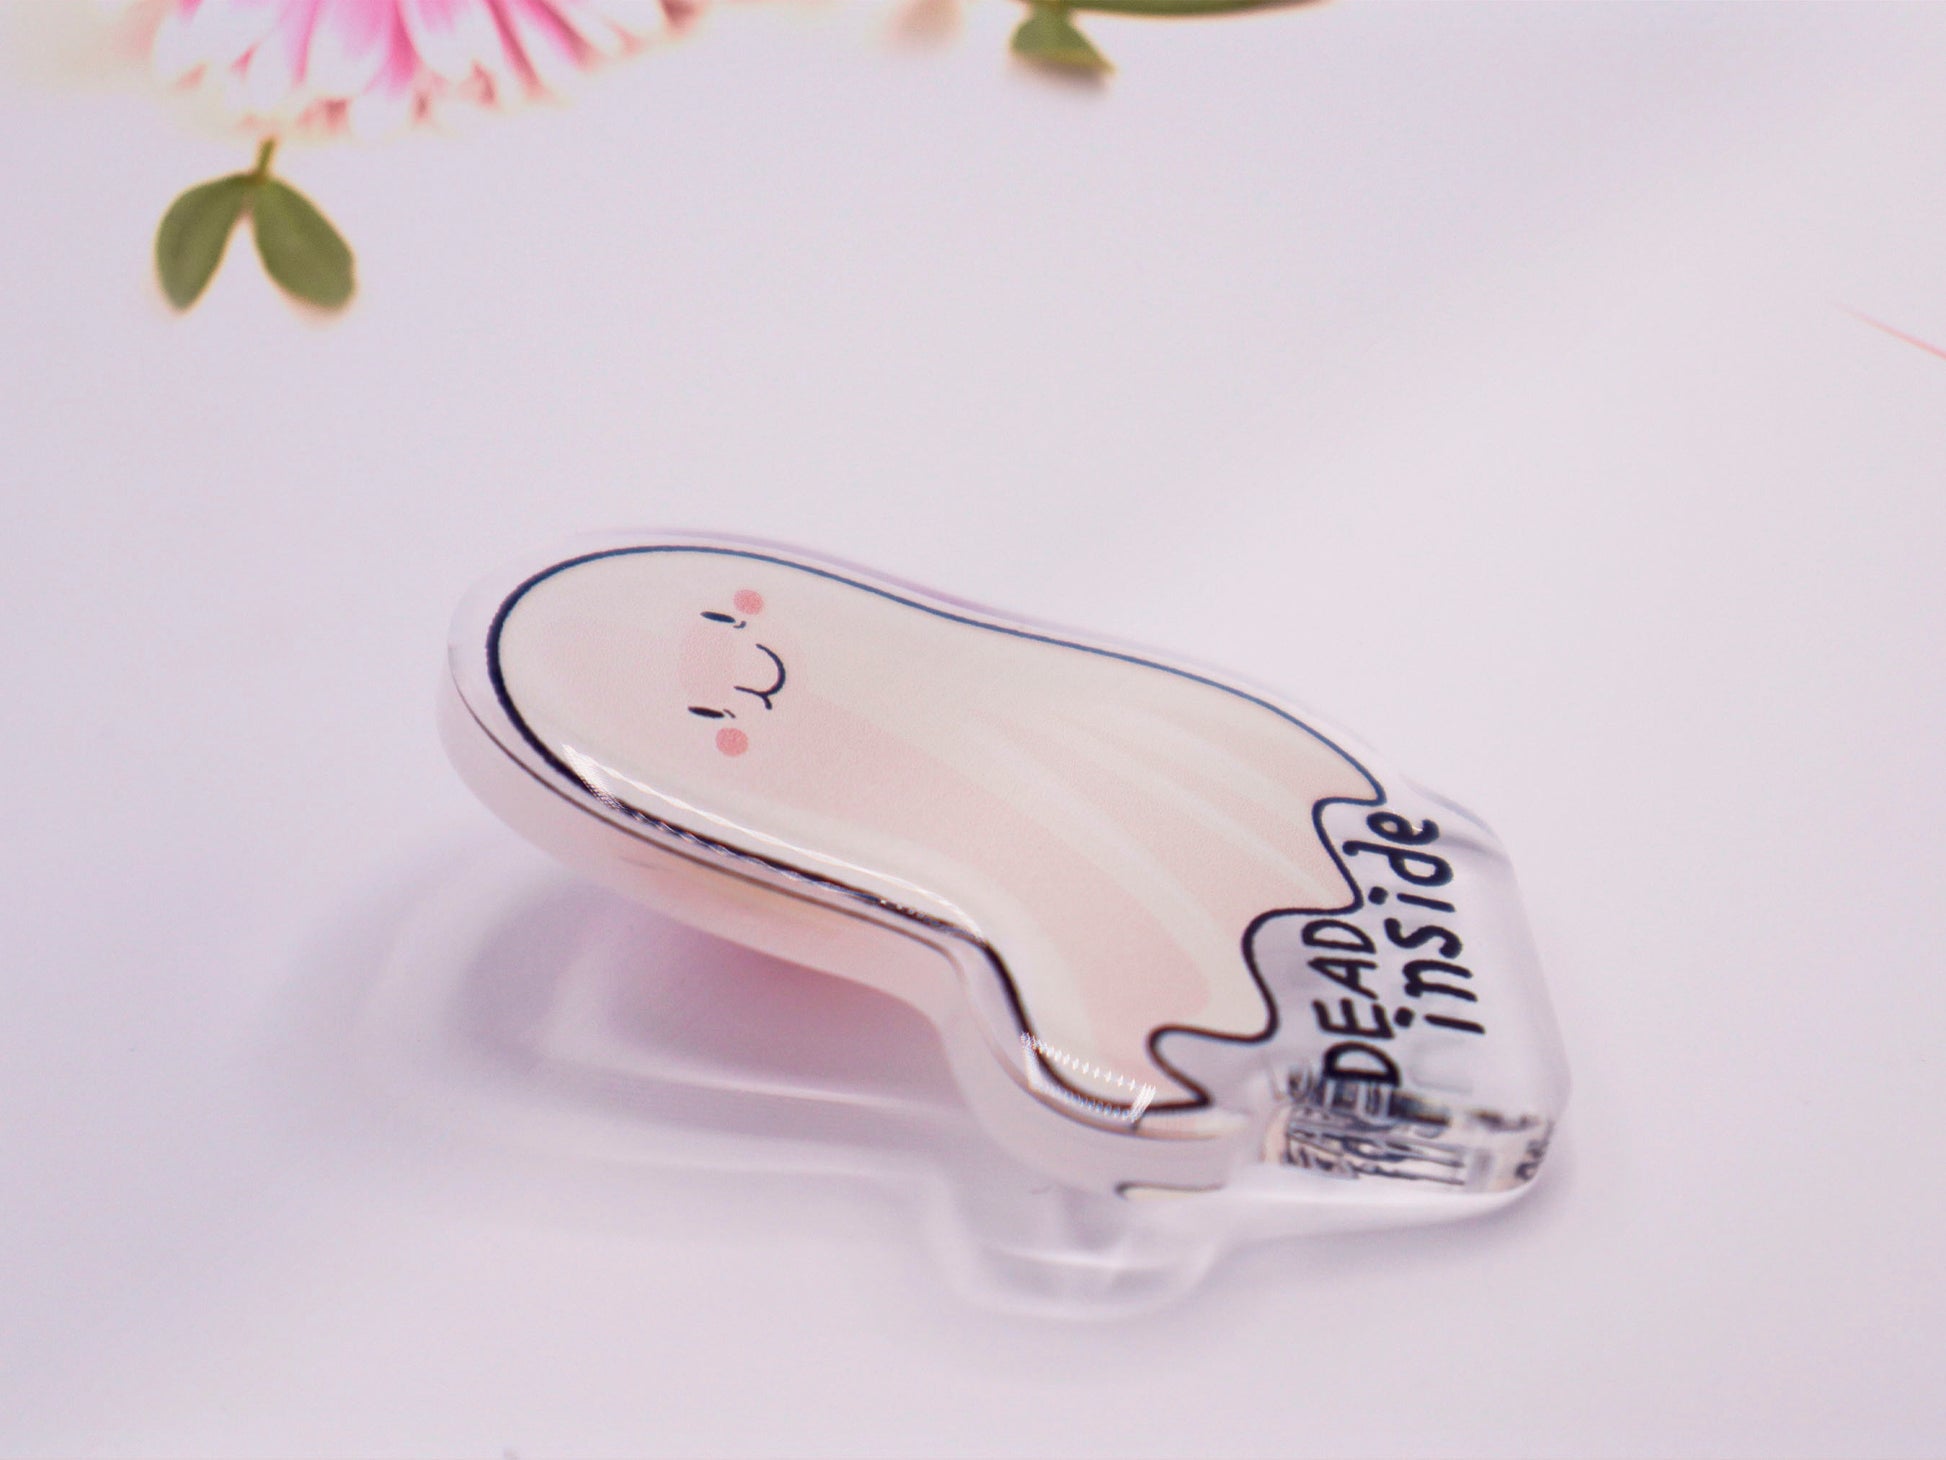 Acrylic pin badge of smiling but depressed cartoon ghost with the quote dead inside written below.